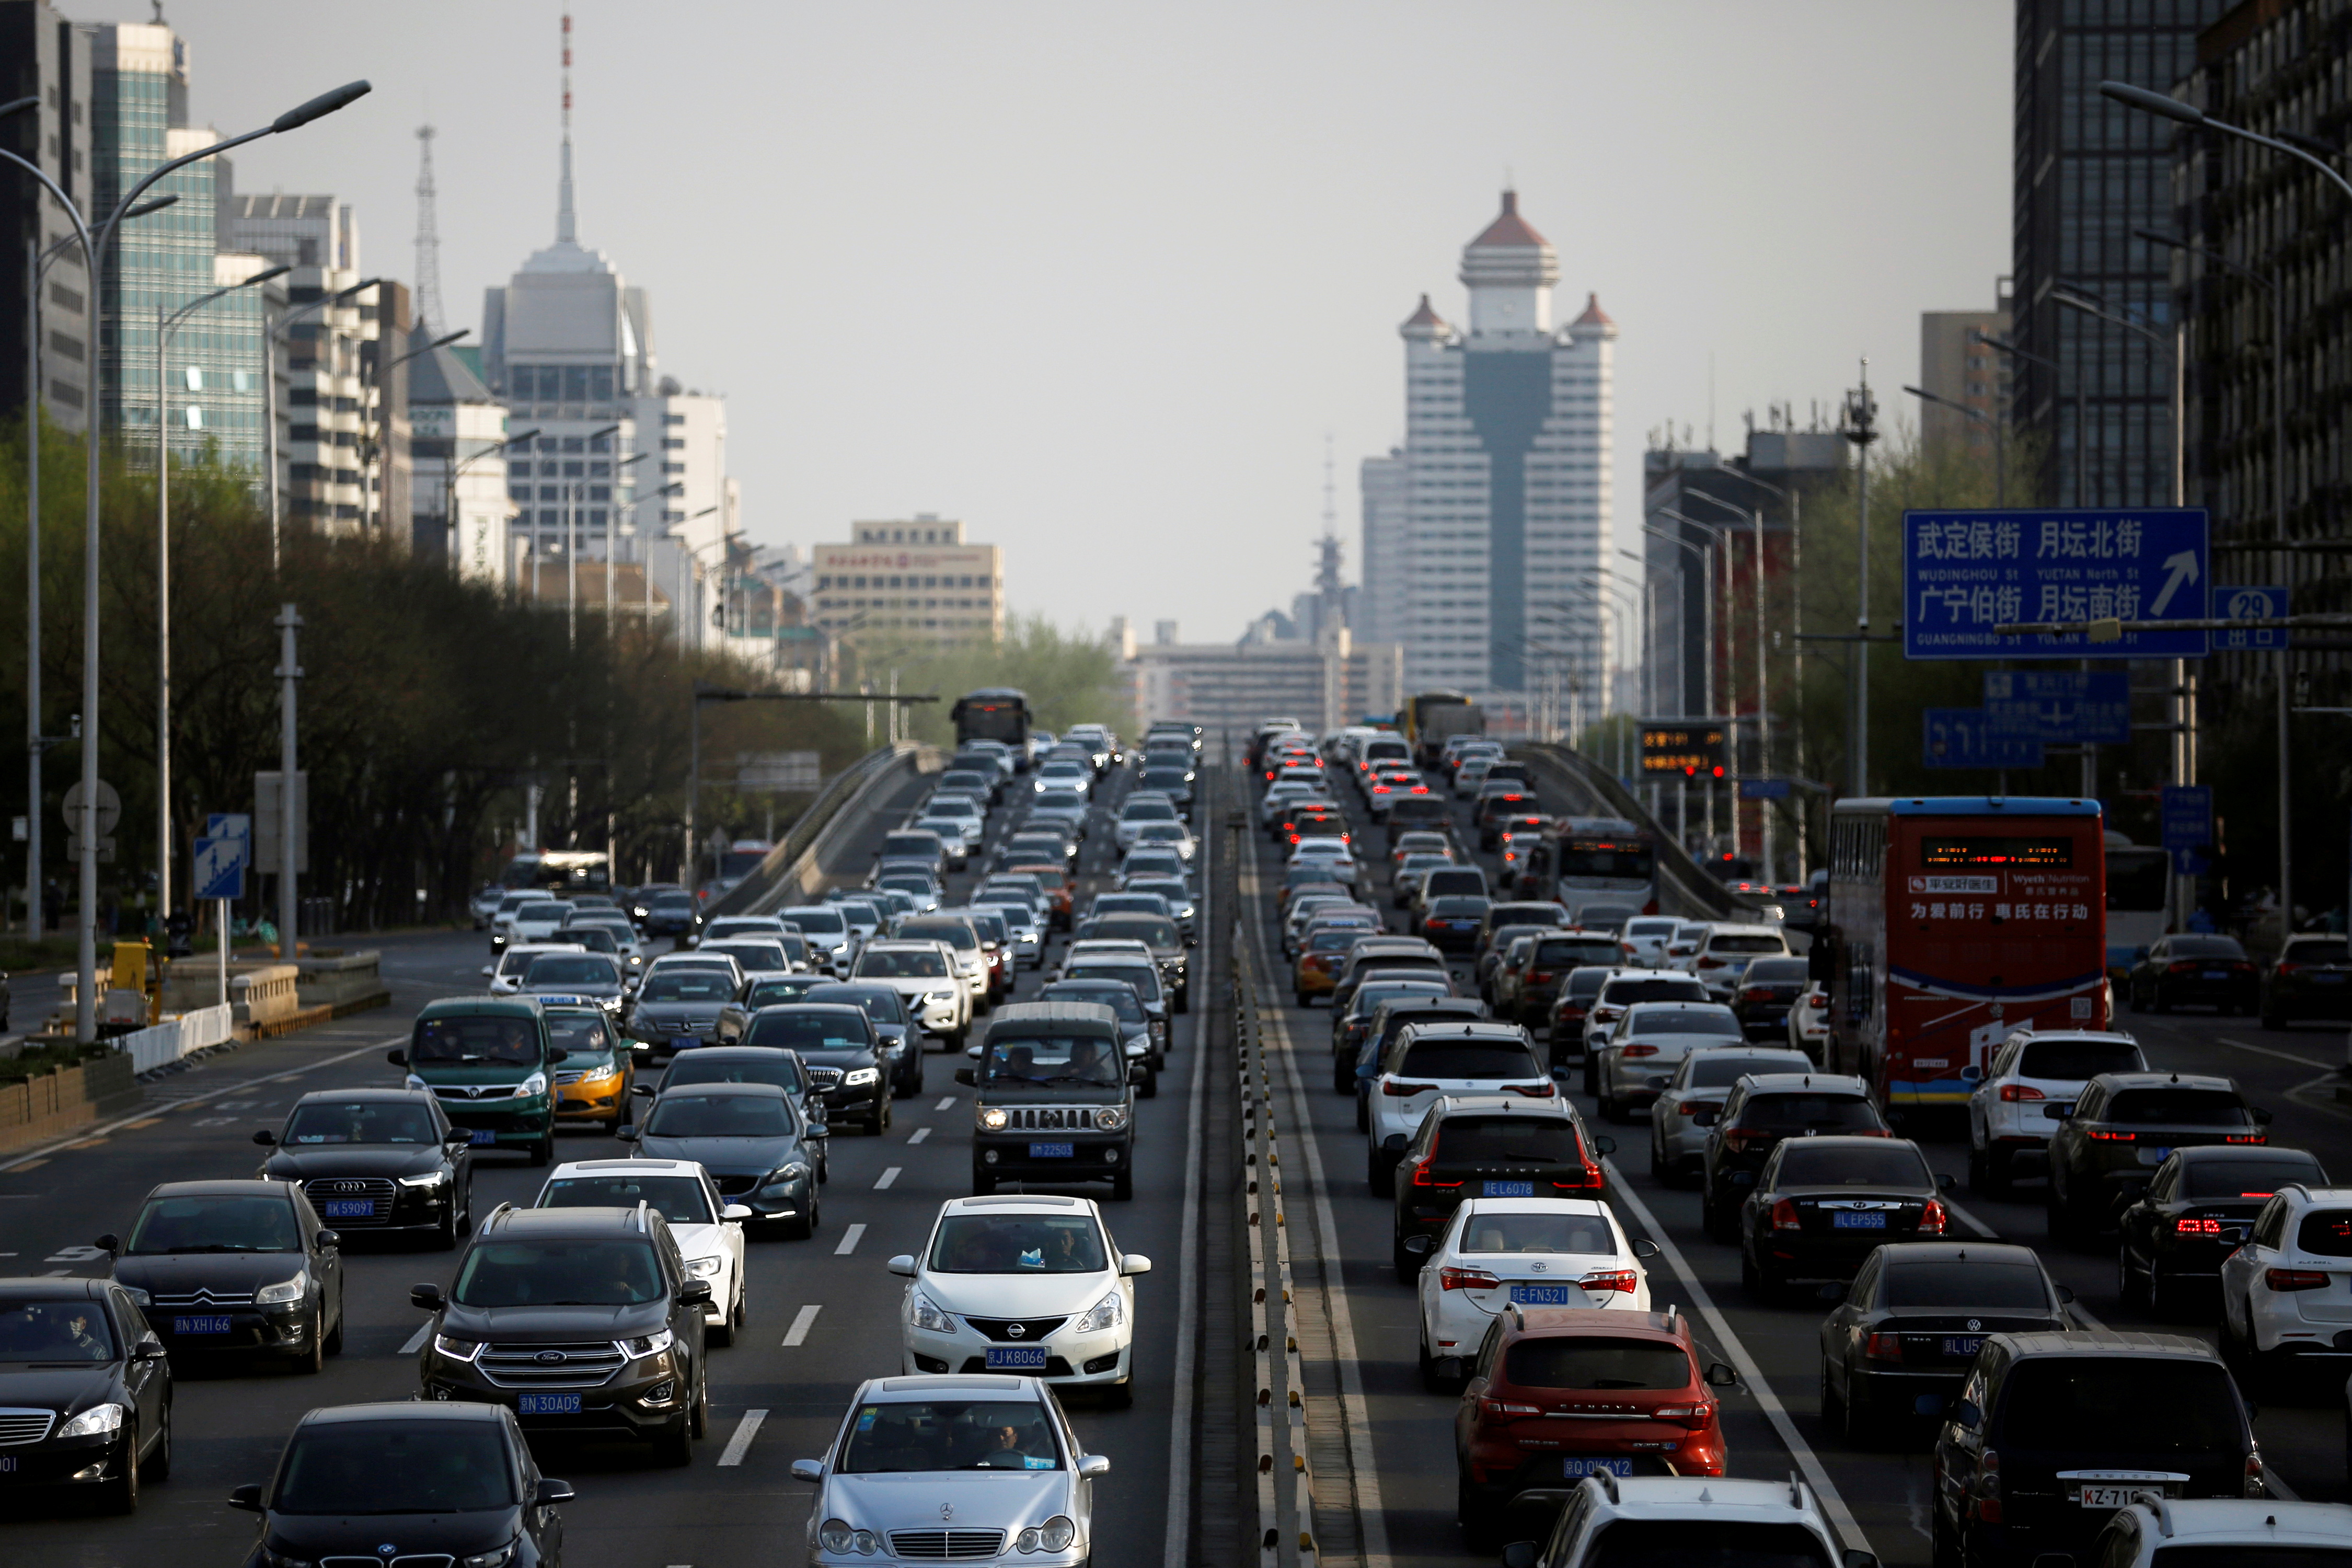 Cars are seen in a traffic jam during evening rush hour in Beijing, as the country is hit by an outbreak of the novel coronavirus disease (COVID-19)